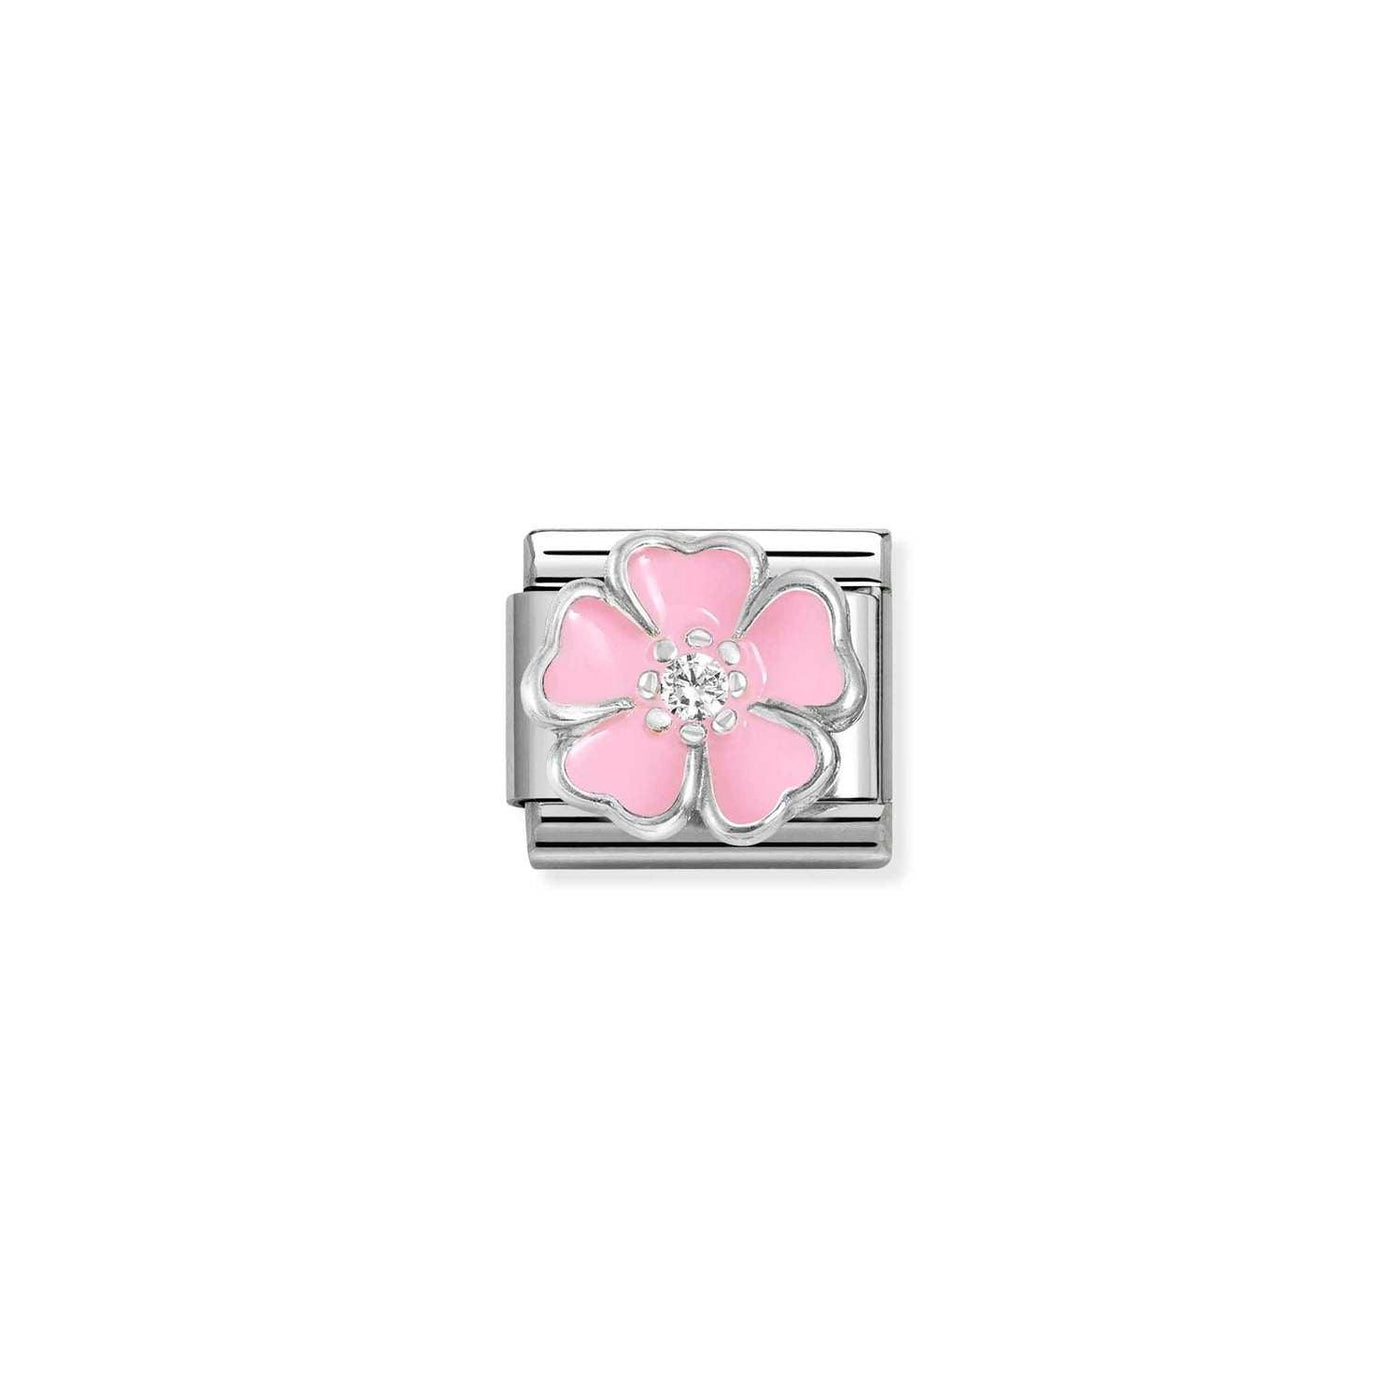 Nomination Classic Silver Pink Flower Charm